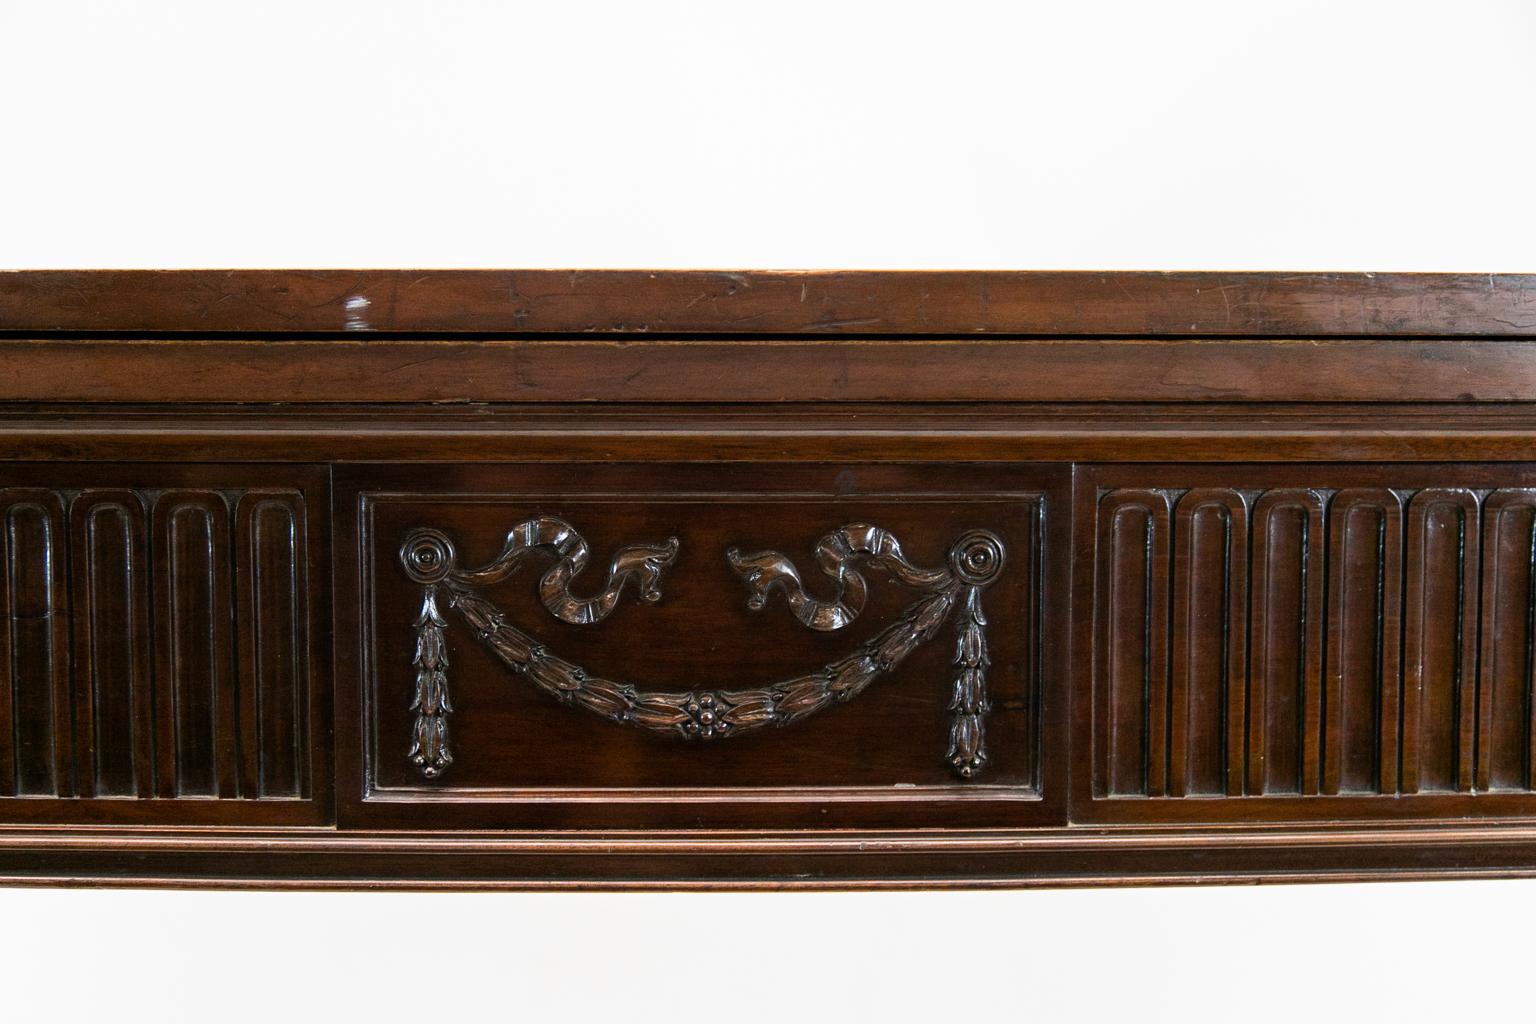 English mahogany serpentine Hepplewhite console table or server has fluted front legs terminating in Marlborough feet. The top lifts to reveal a surface covered with baize. The apron is fluted and has carved oval medallions flanking a center panel